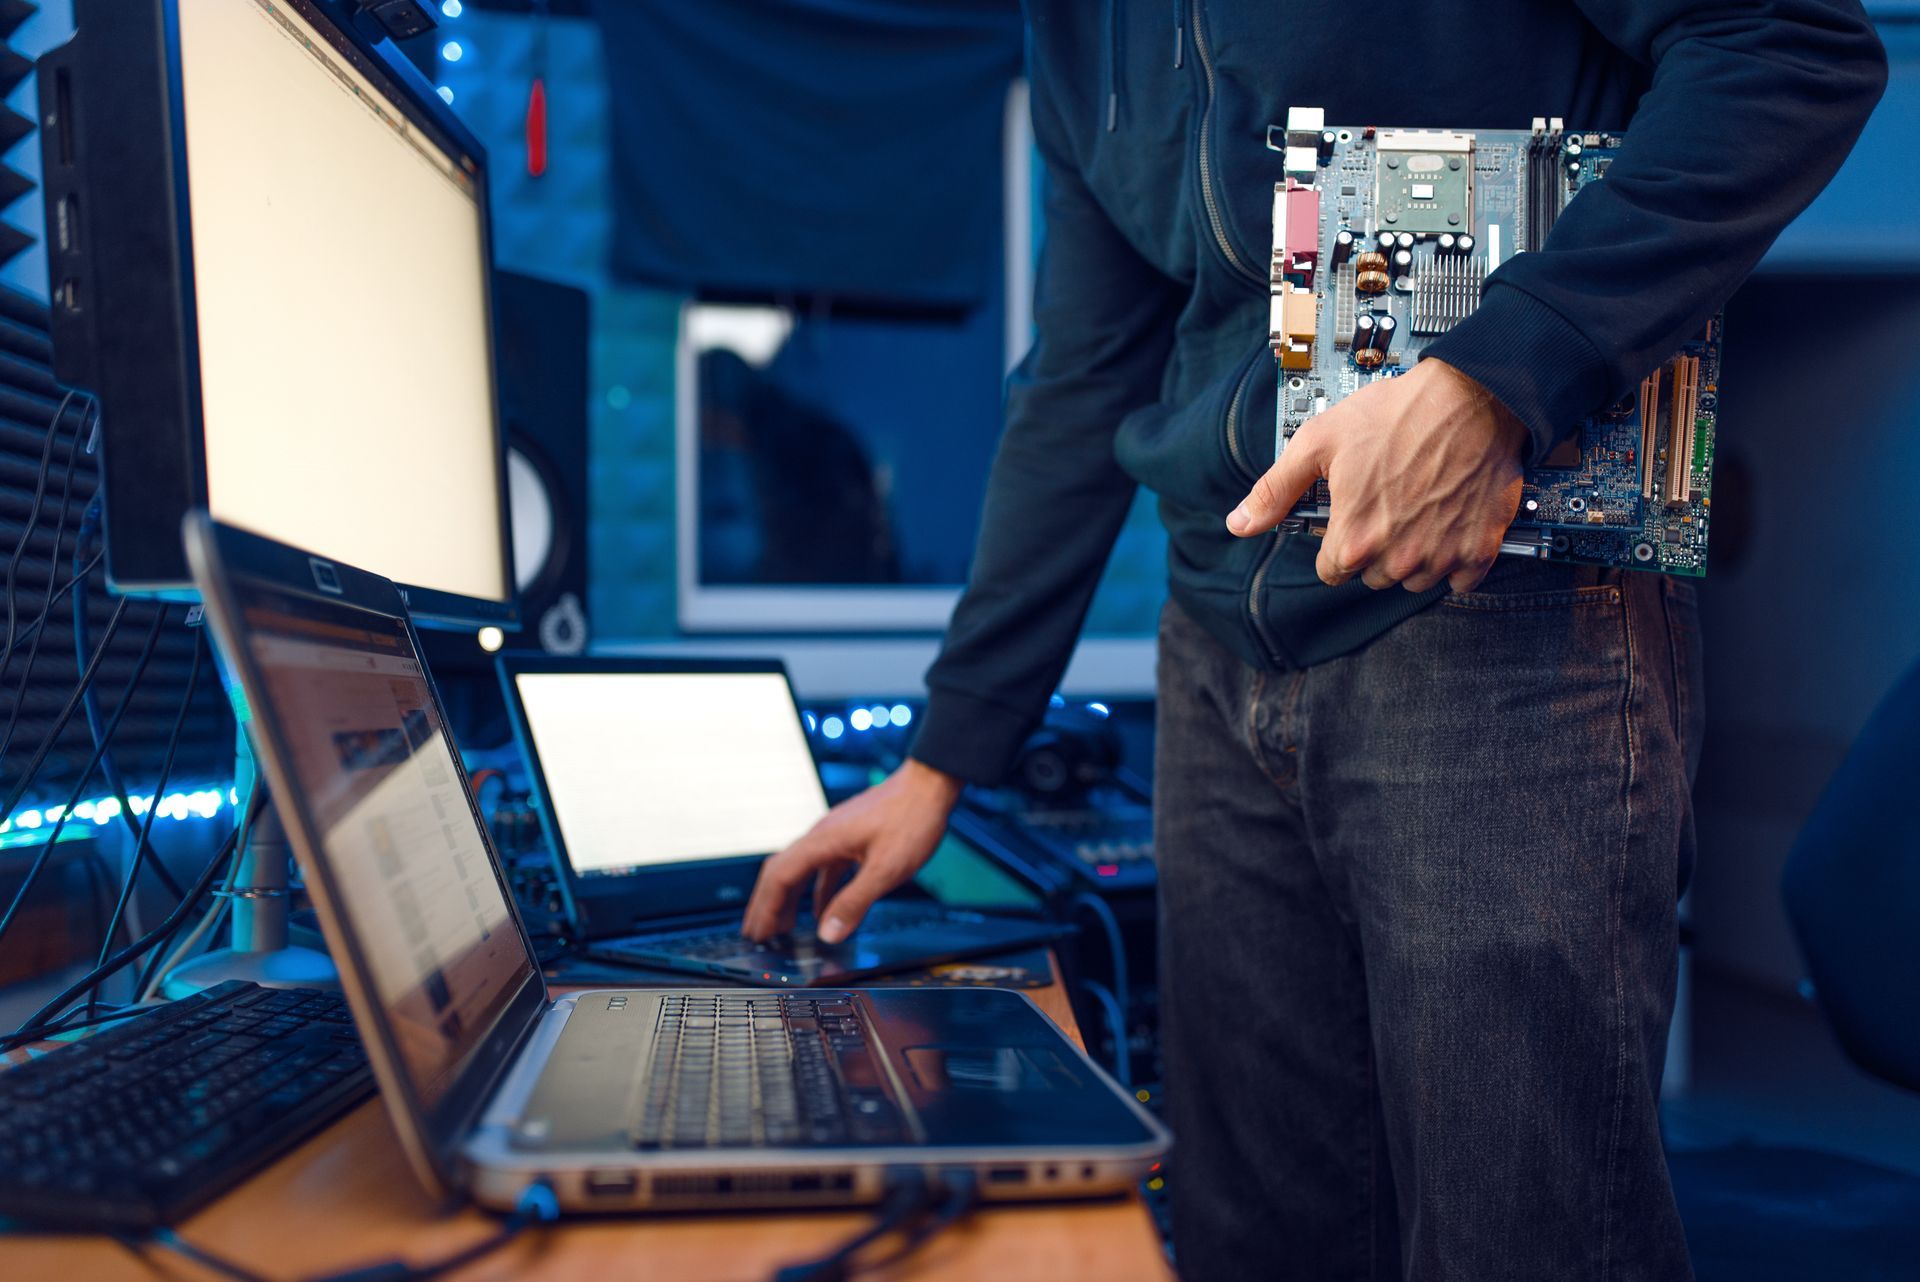 a man is holding a motherboard in front of a laptop